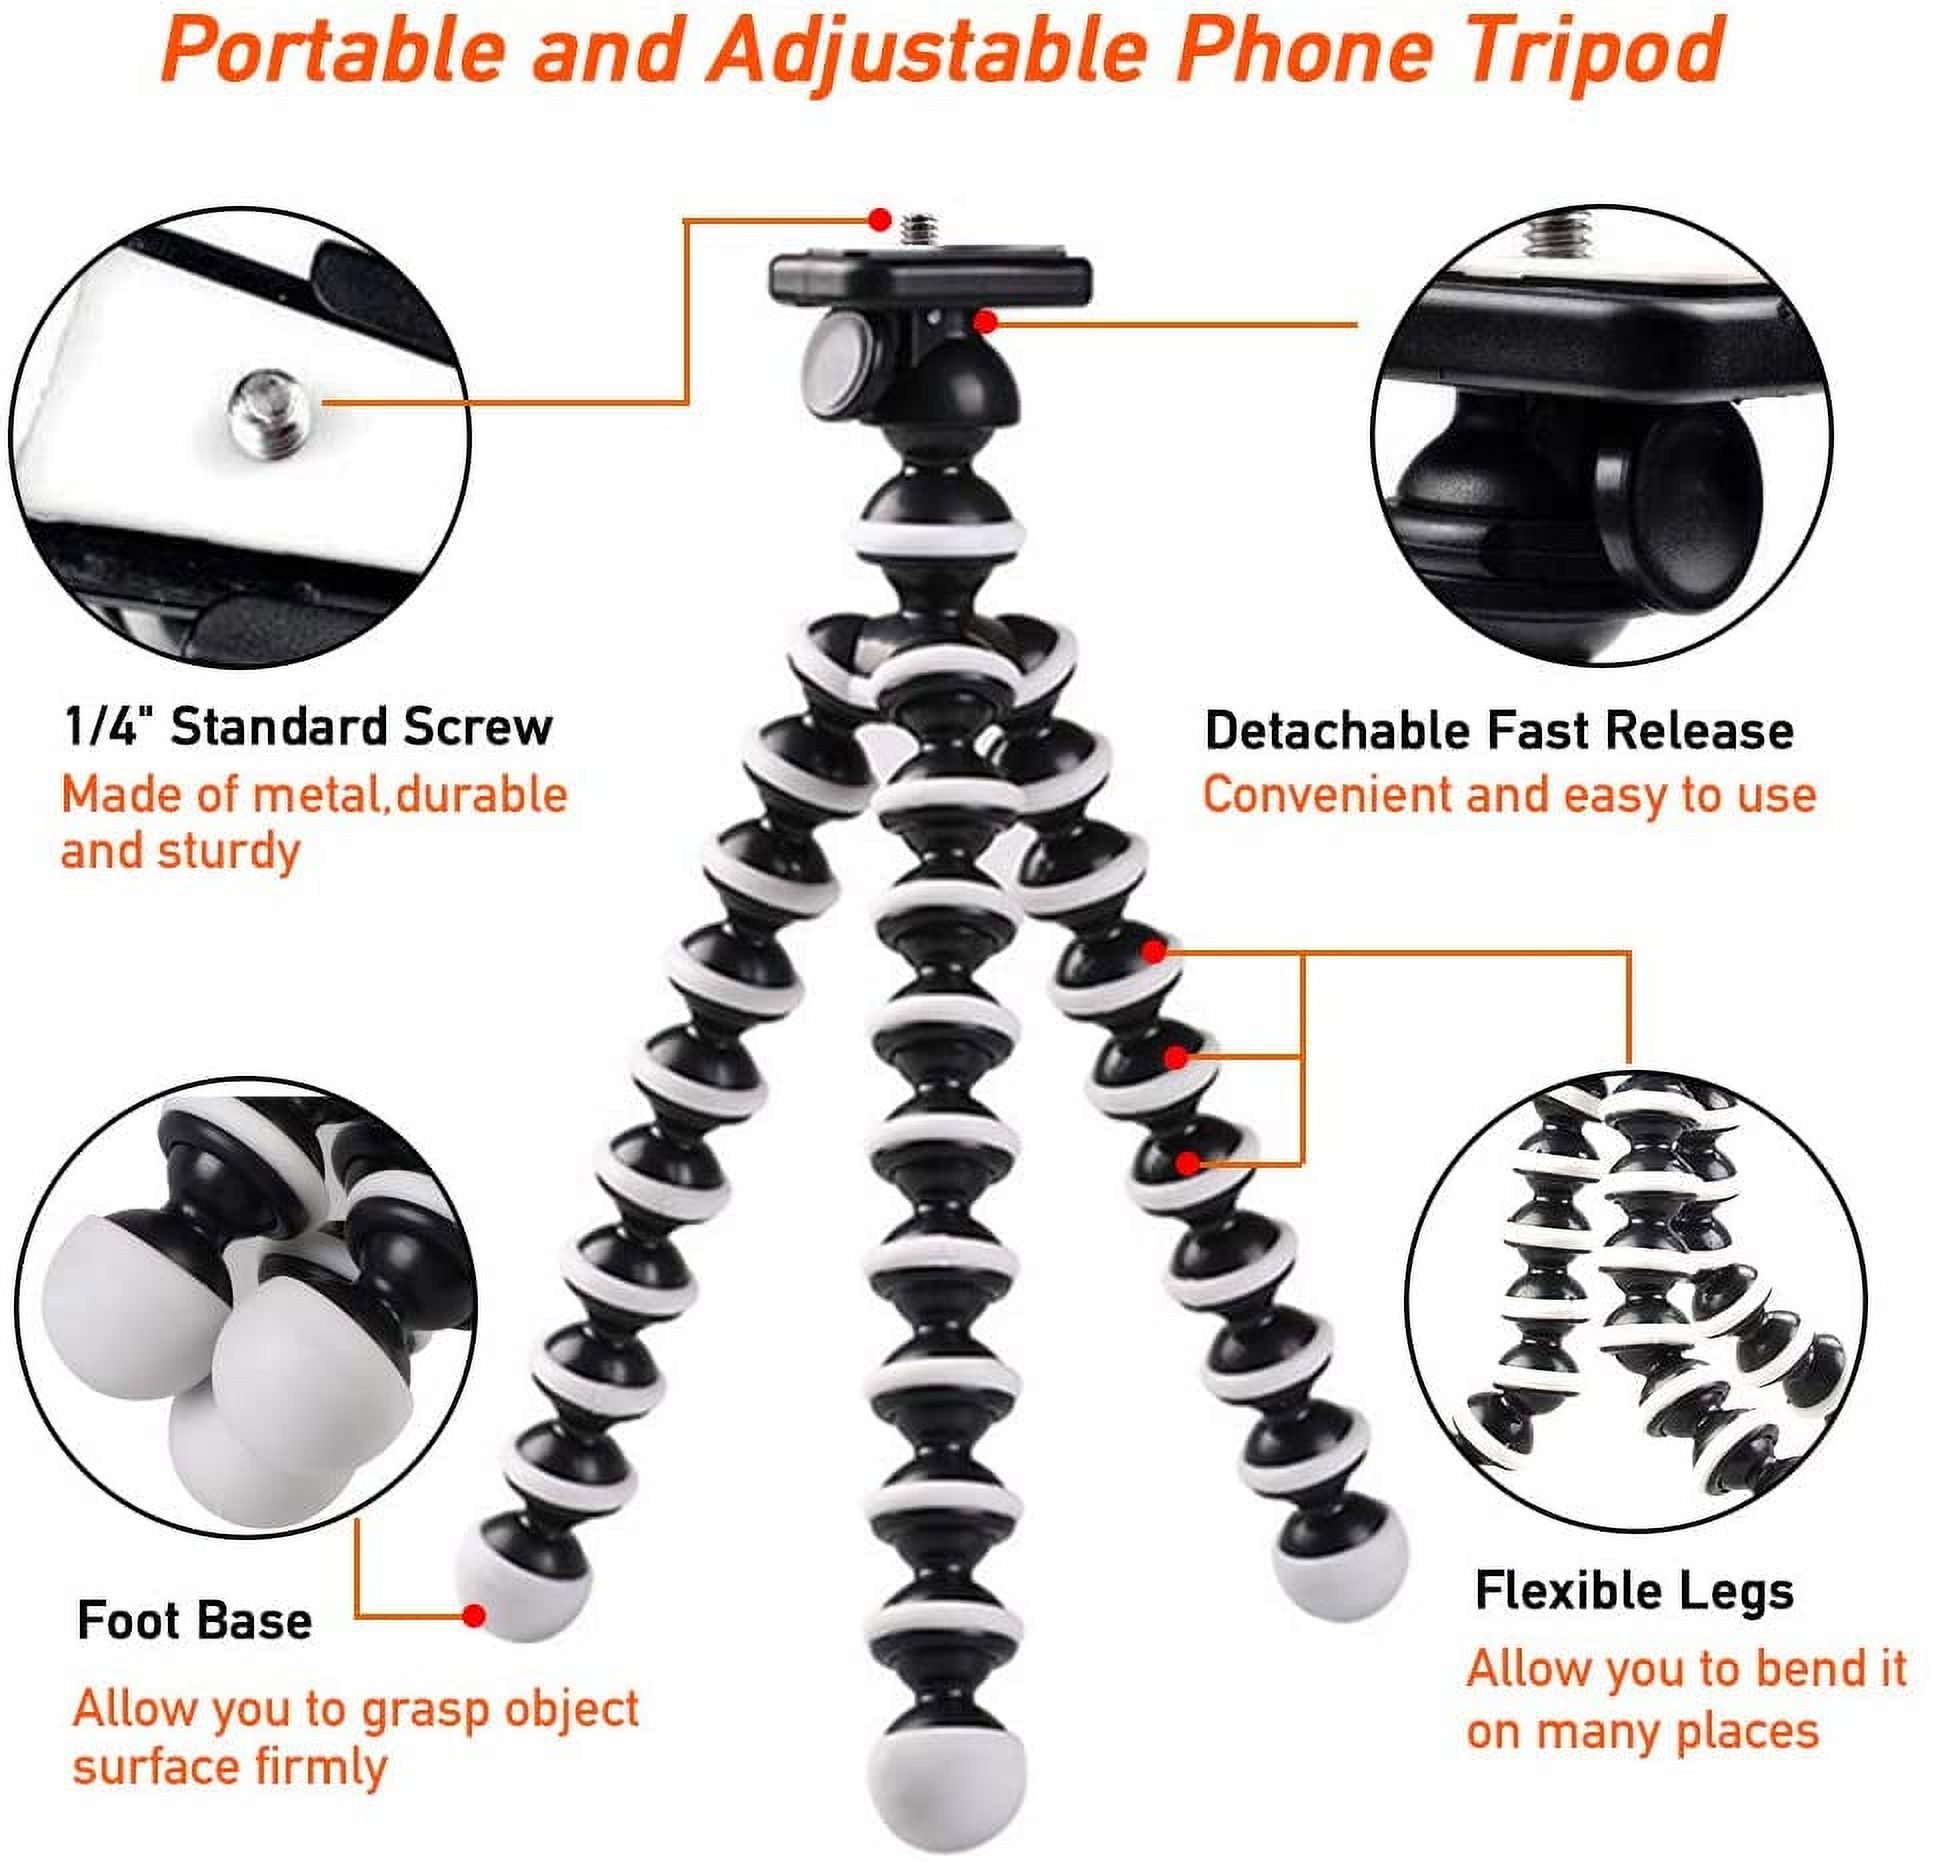 Phone Tripod, Portable Cell Phone Tripod Camera Tripod Stand with Wireless Remote Flexible Tripod Stand Compatible for iPhone 11 Pro Xs MAX XR X SE 8 7 6S Plus Samsung Android Phones Gopro Camera - image 4 of 7